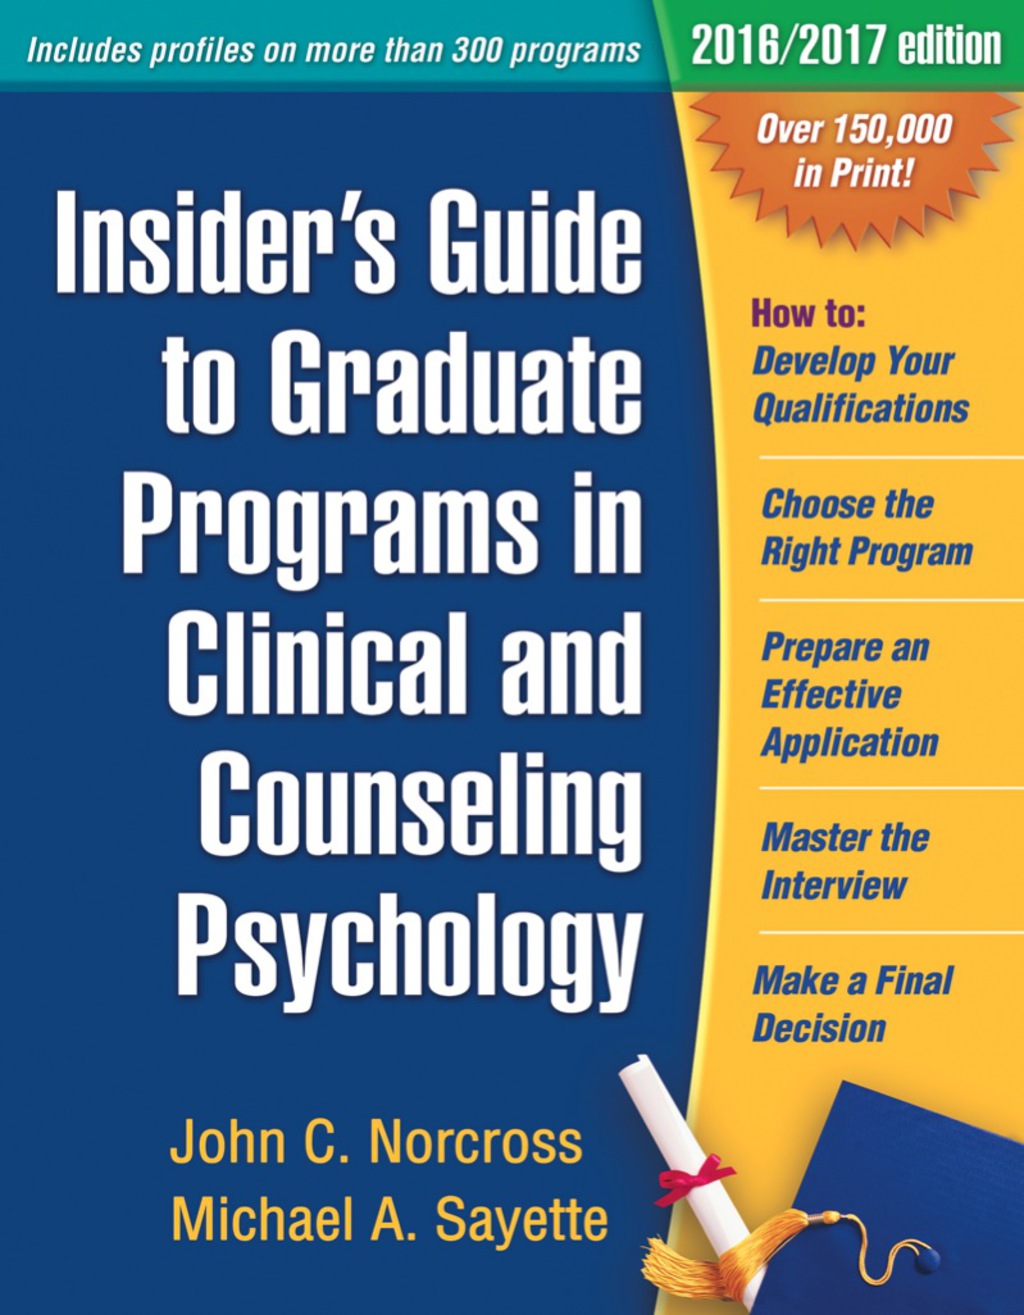 Insider's Guide to Graduate Programs in Clinical and Counseling Psychology (eBook) - John C. Norcross,